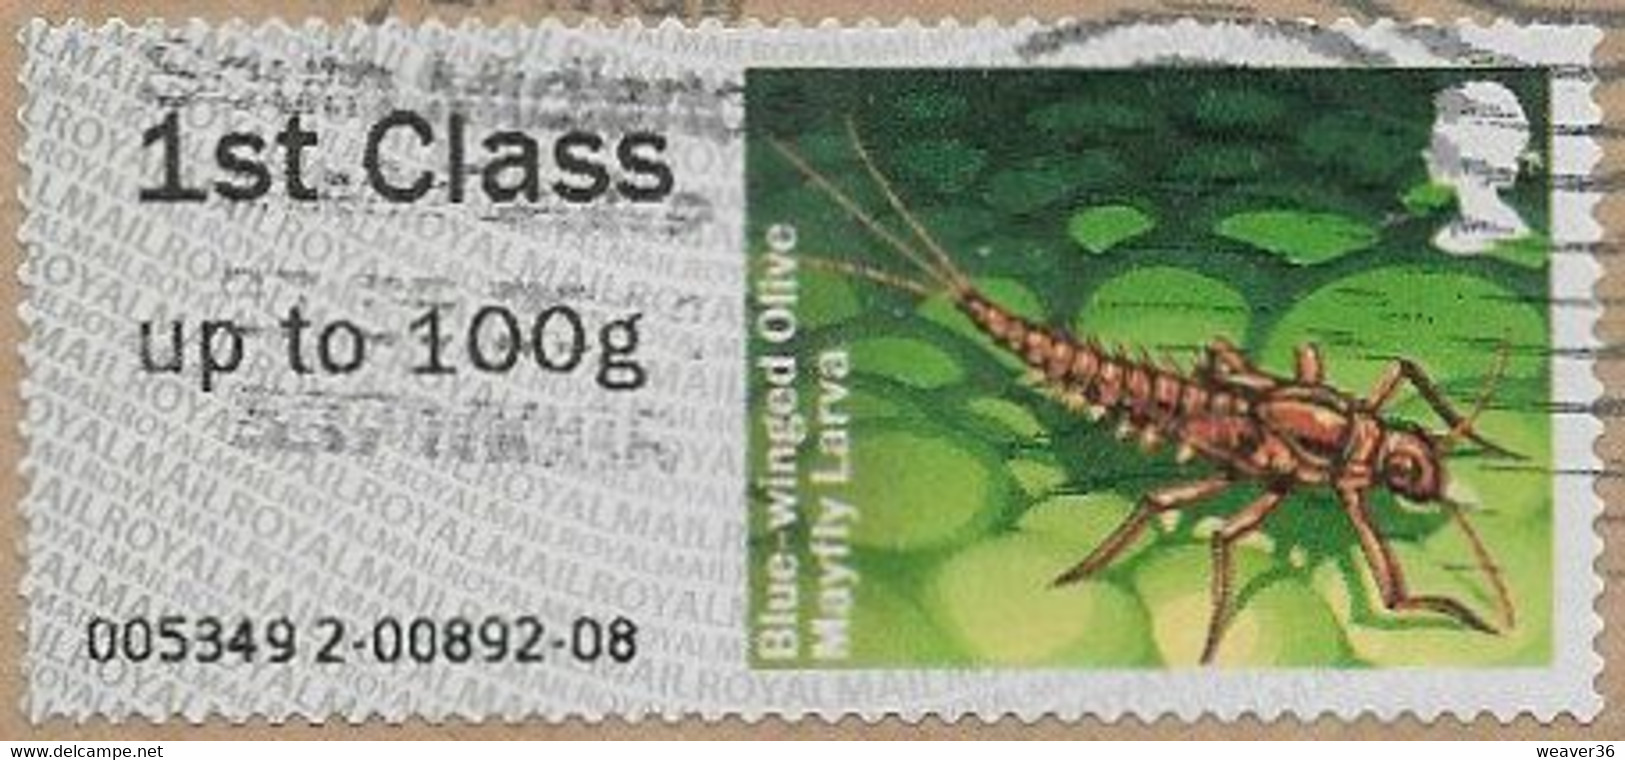 GB 2013 Freshwater Life (3rd Series) 1st Type 5 Issuing Office 005349 Used [21/25674/ND] - Post & Go Stamps